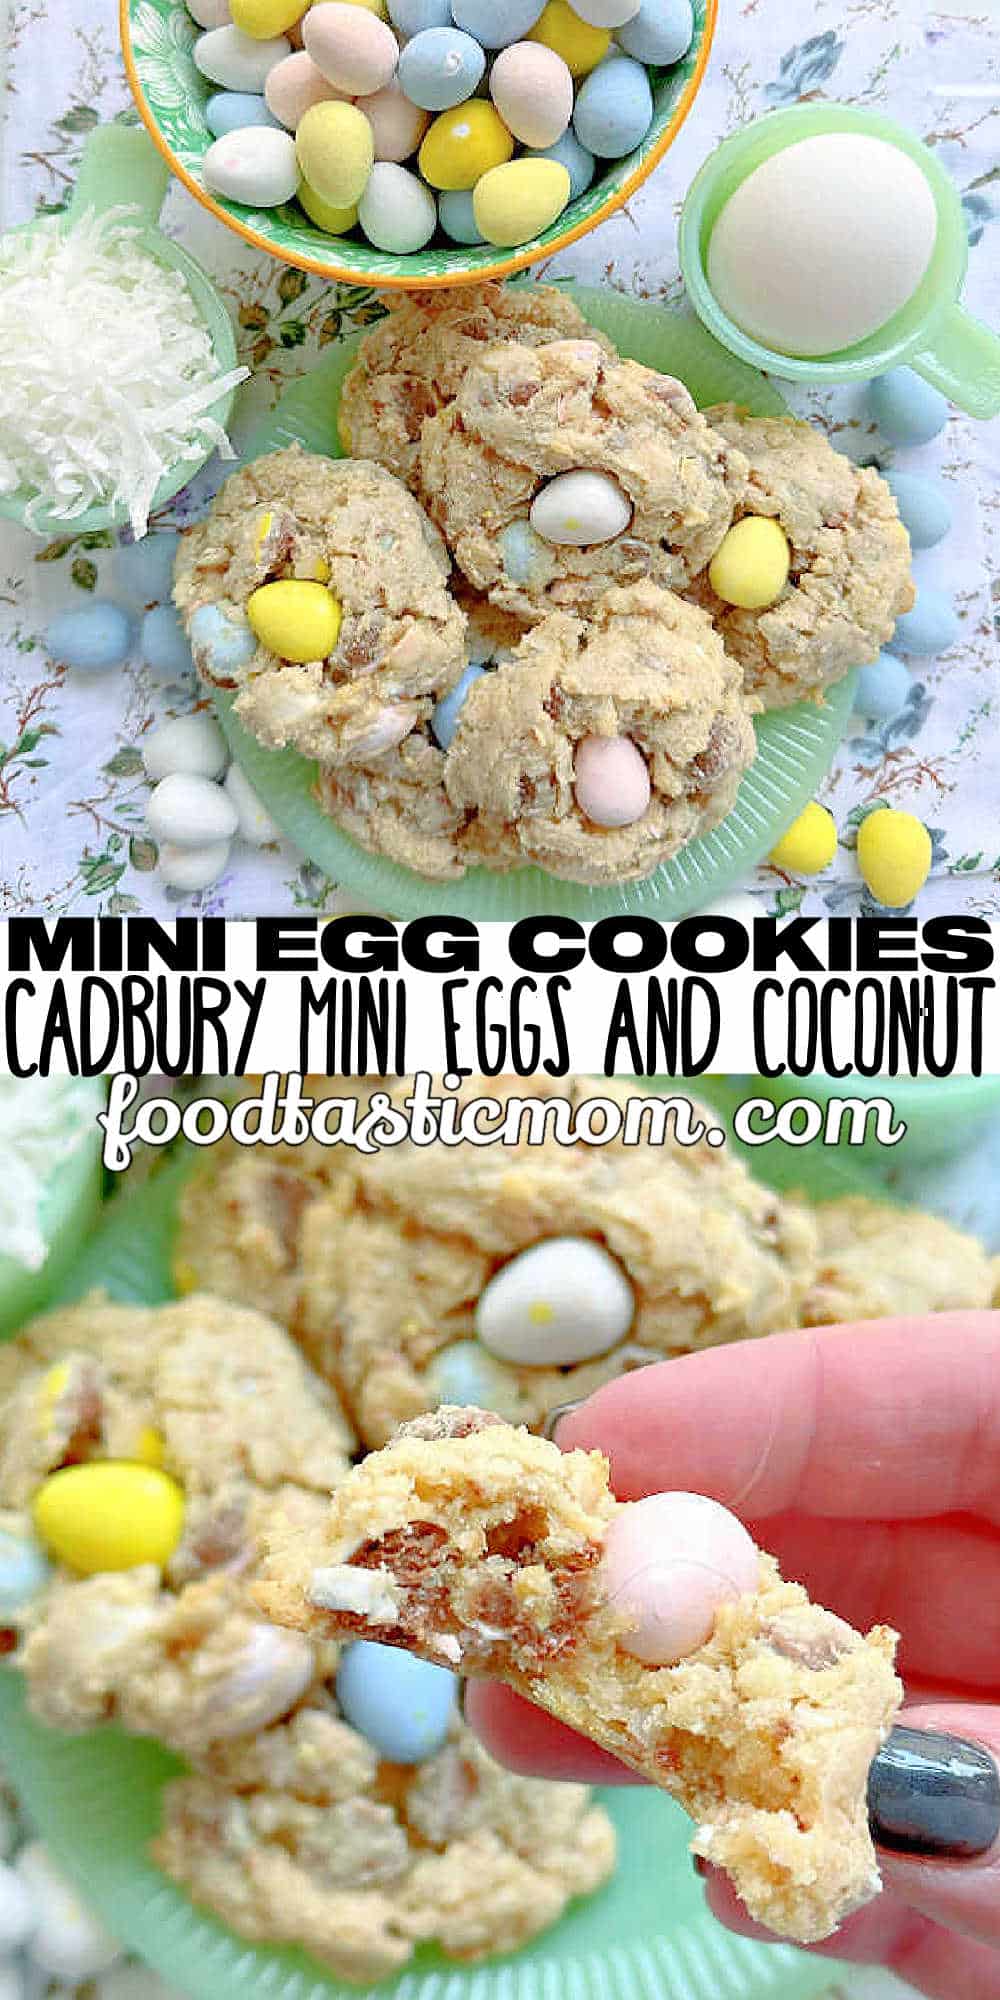 Mini Egg Cookies incorporate Cadbury mini egg chocolate candy and coconut into a deliciously chewy cookie perfect for the Easter season. via @foodtasticmom